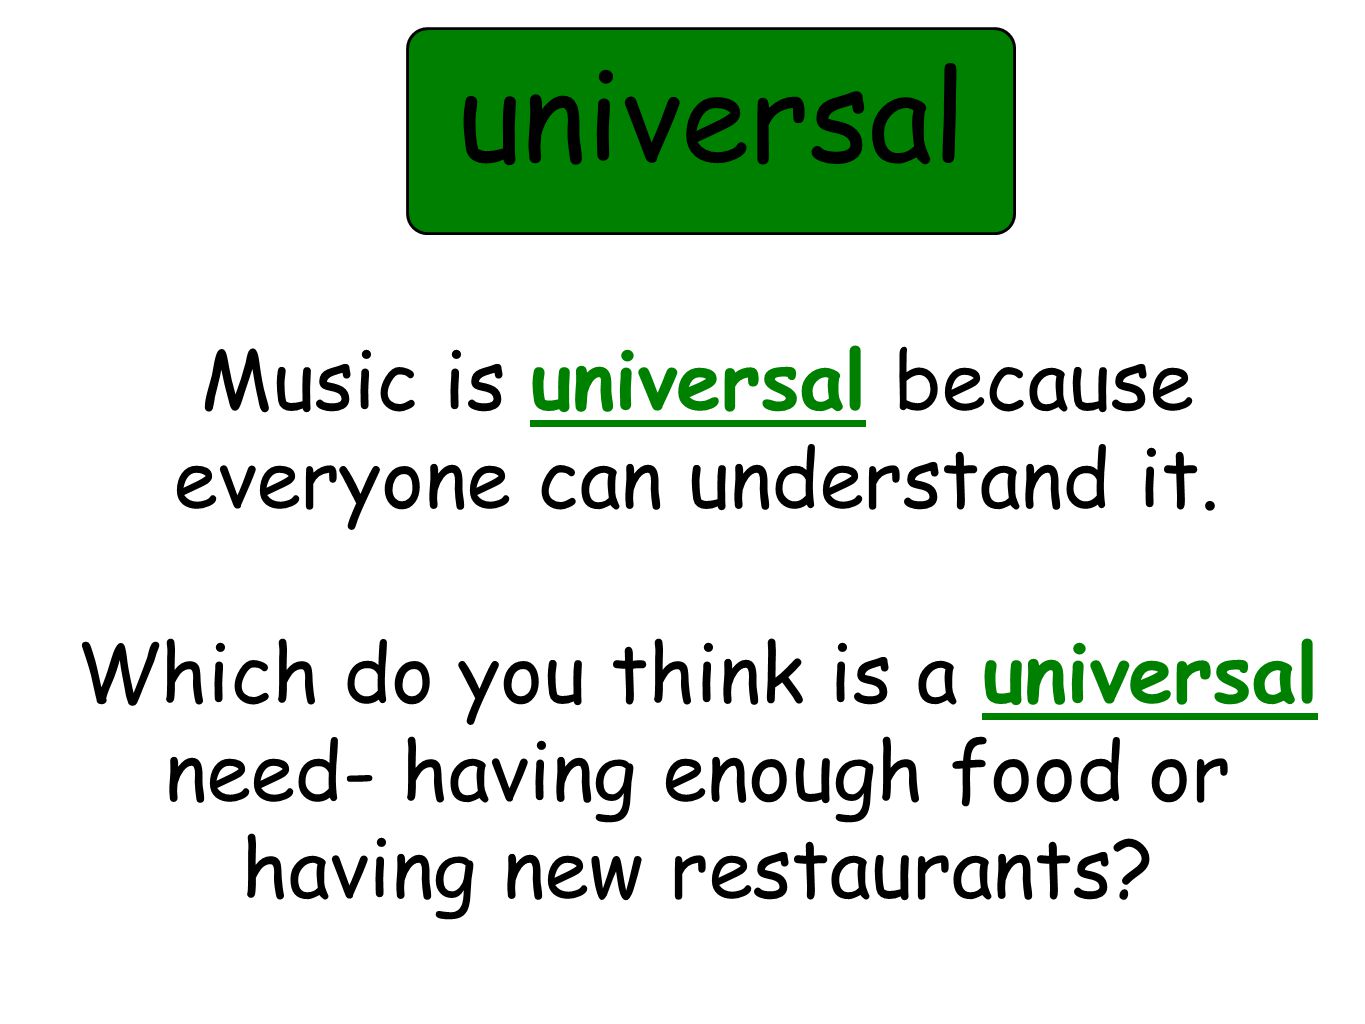 Music is universal because everyone can understand it.